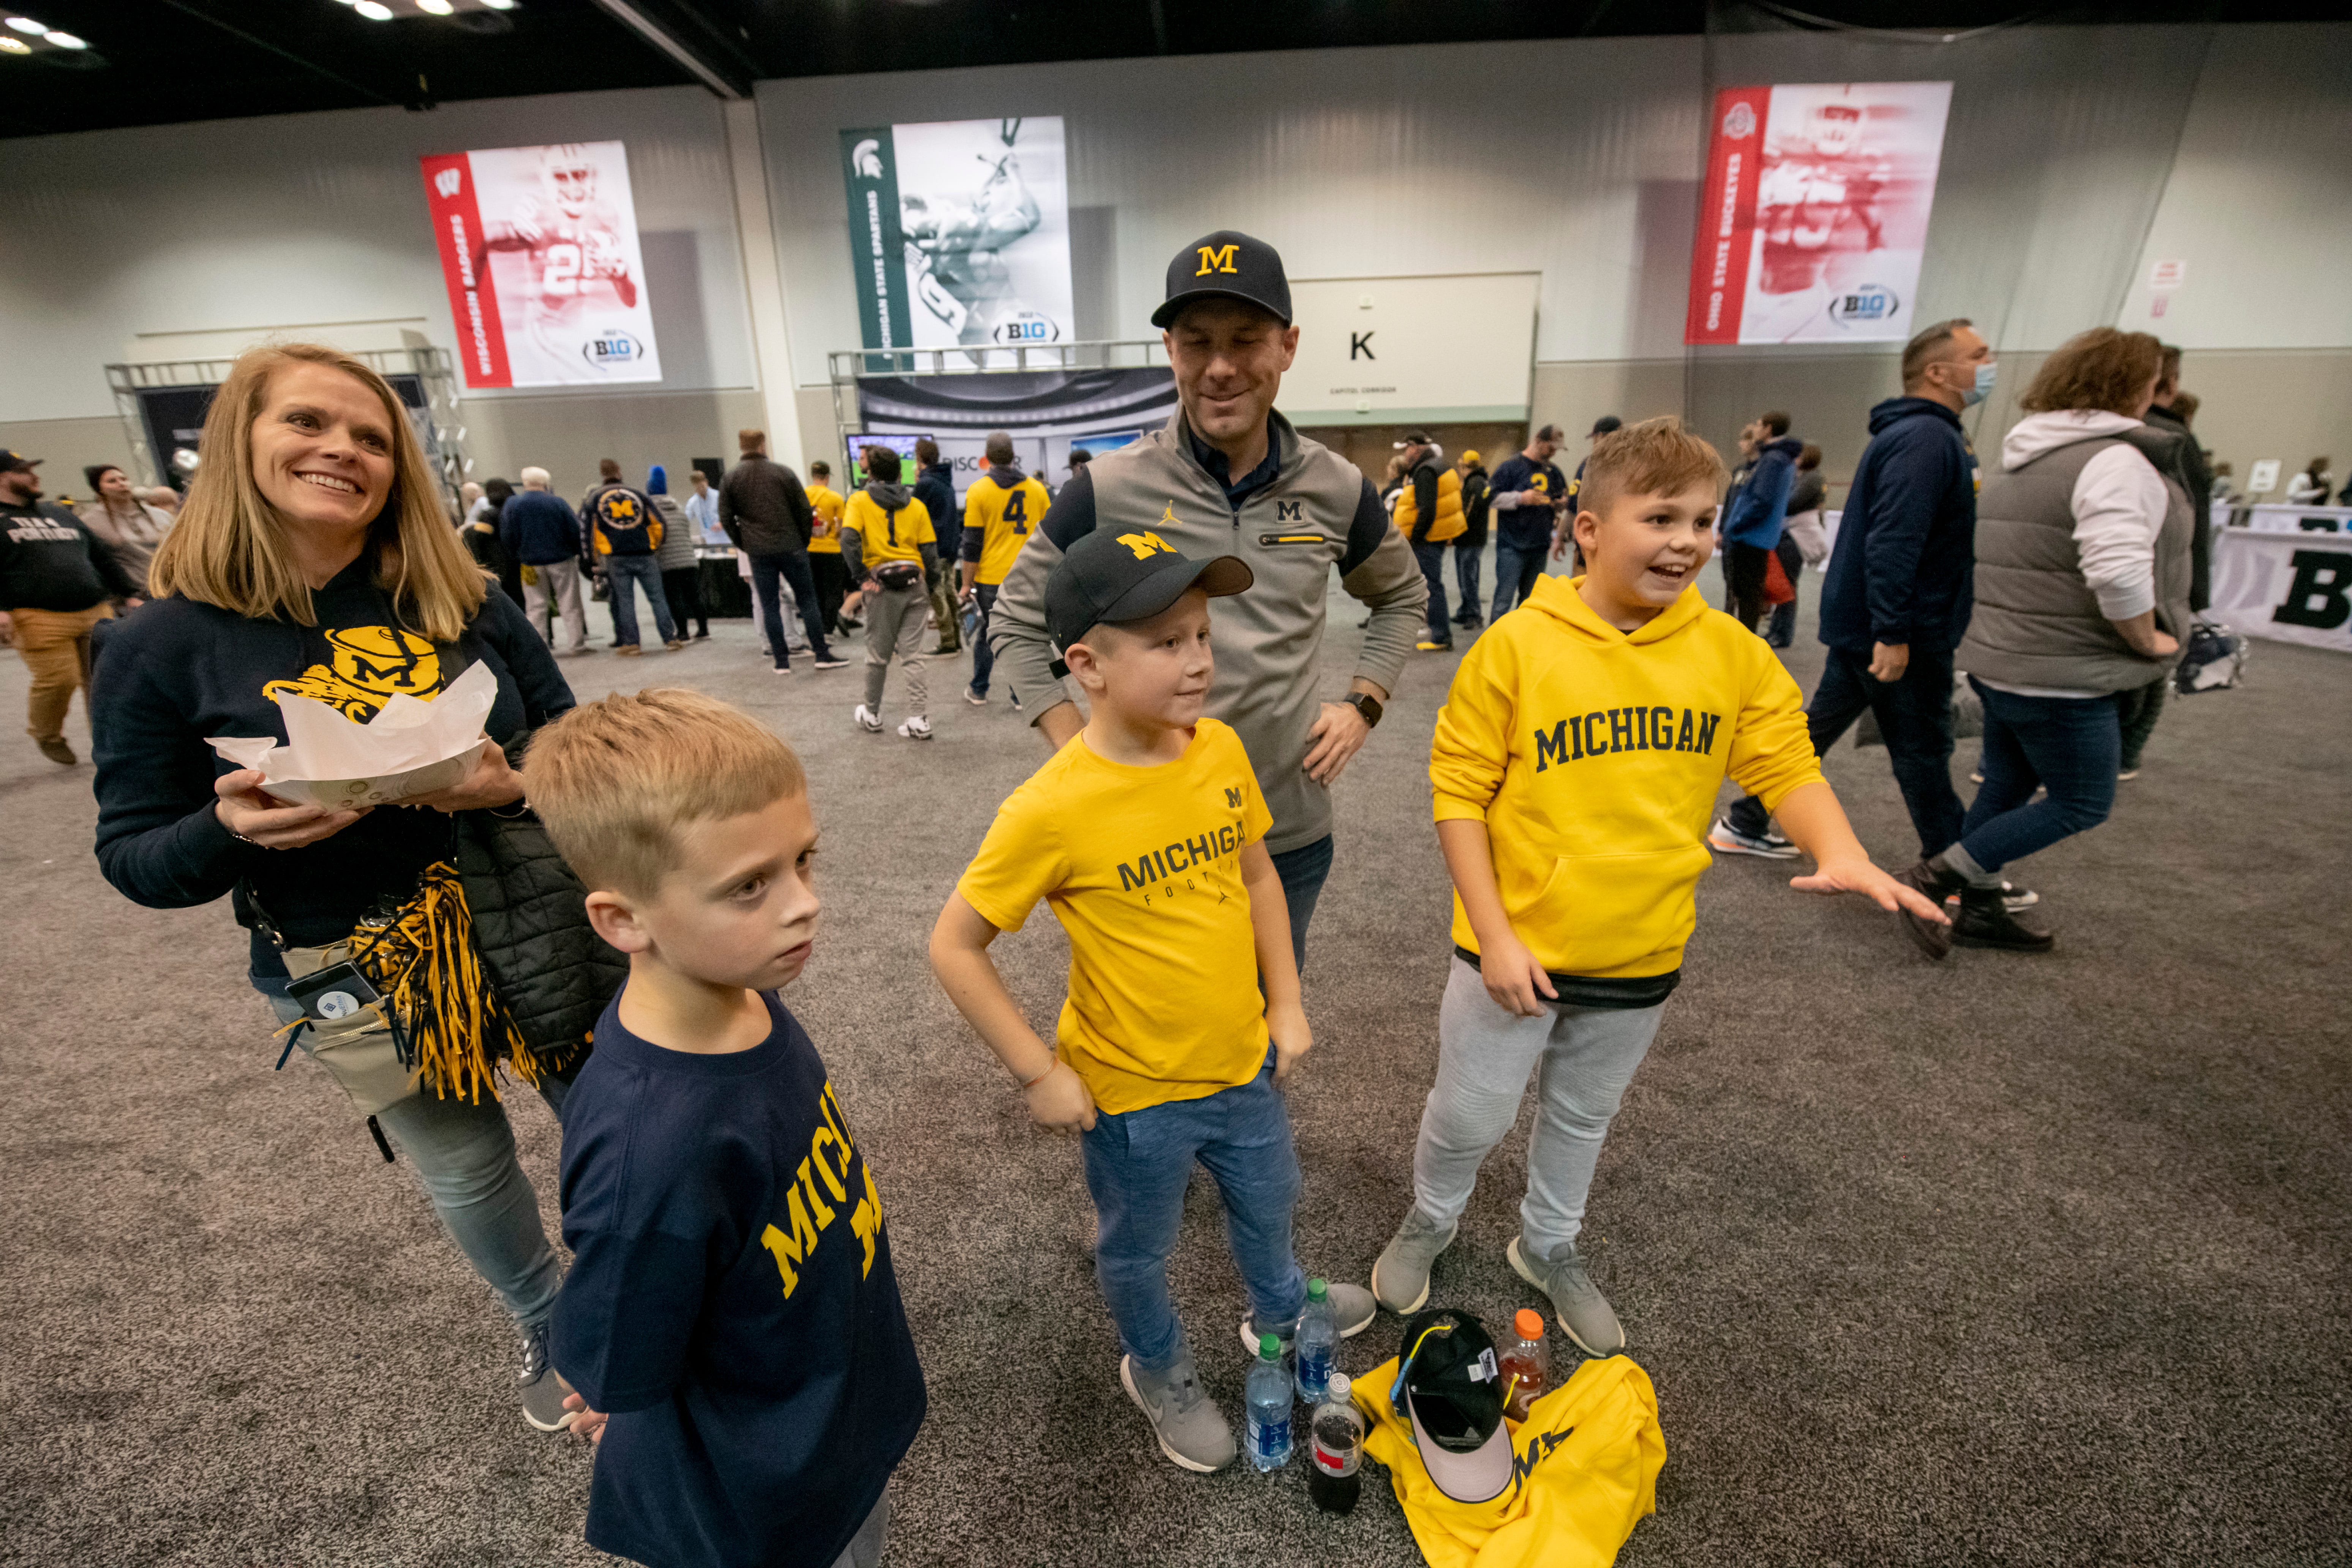 (From left) Stephaney Theobald, her son Maddox, 7, hang out with David Noe, and his two sons Matt, 12, and Charlie, 9, at the Fan Fest at the Indiana Convention Center, before the start of the Big Ten championship game in Indianapolis, December 4, 2021. The family is from Kentucky but David Noe was an Ann Arbor native.